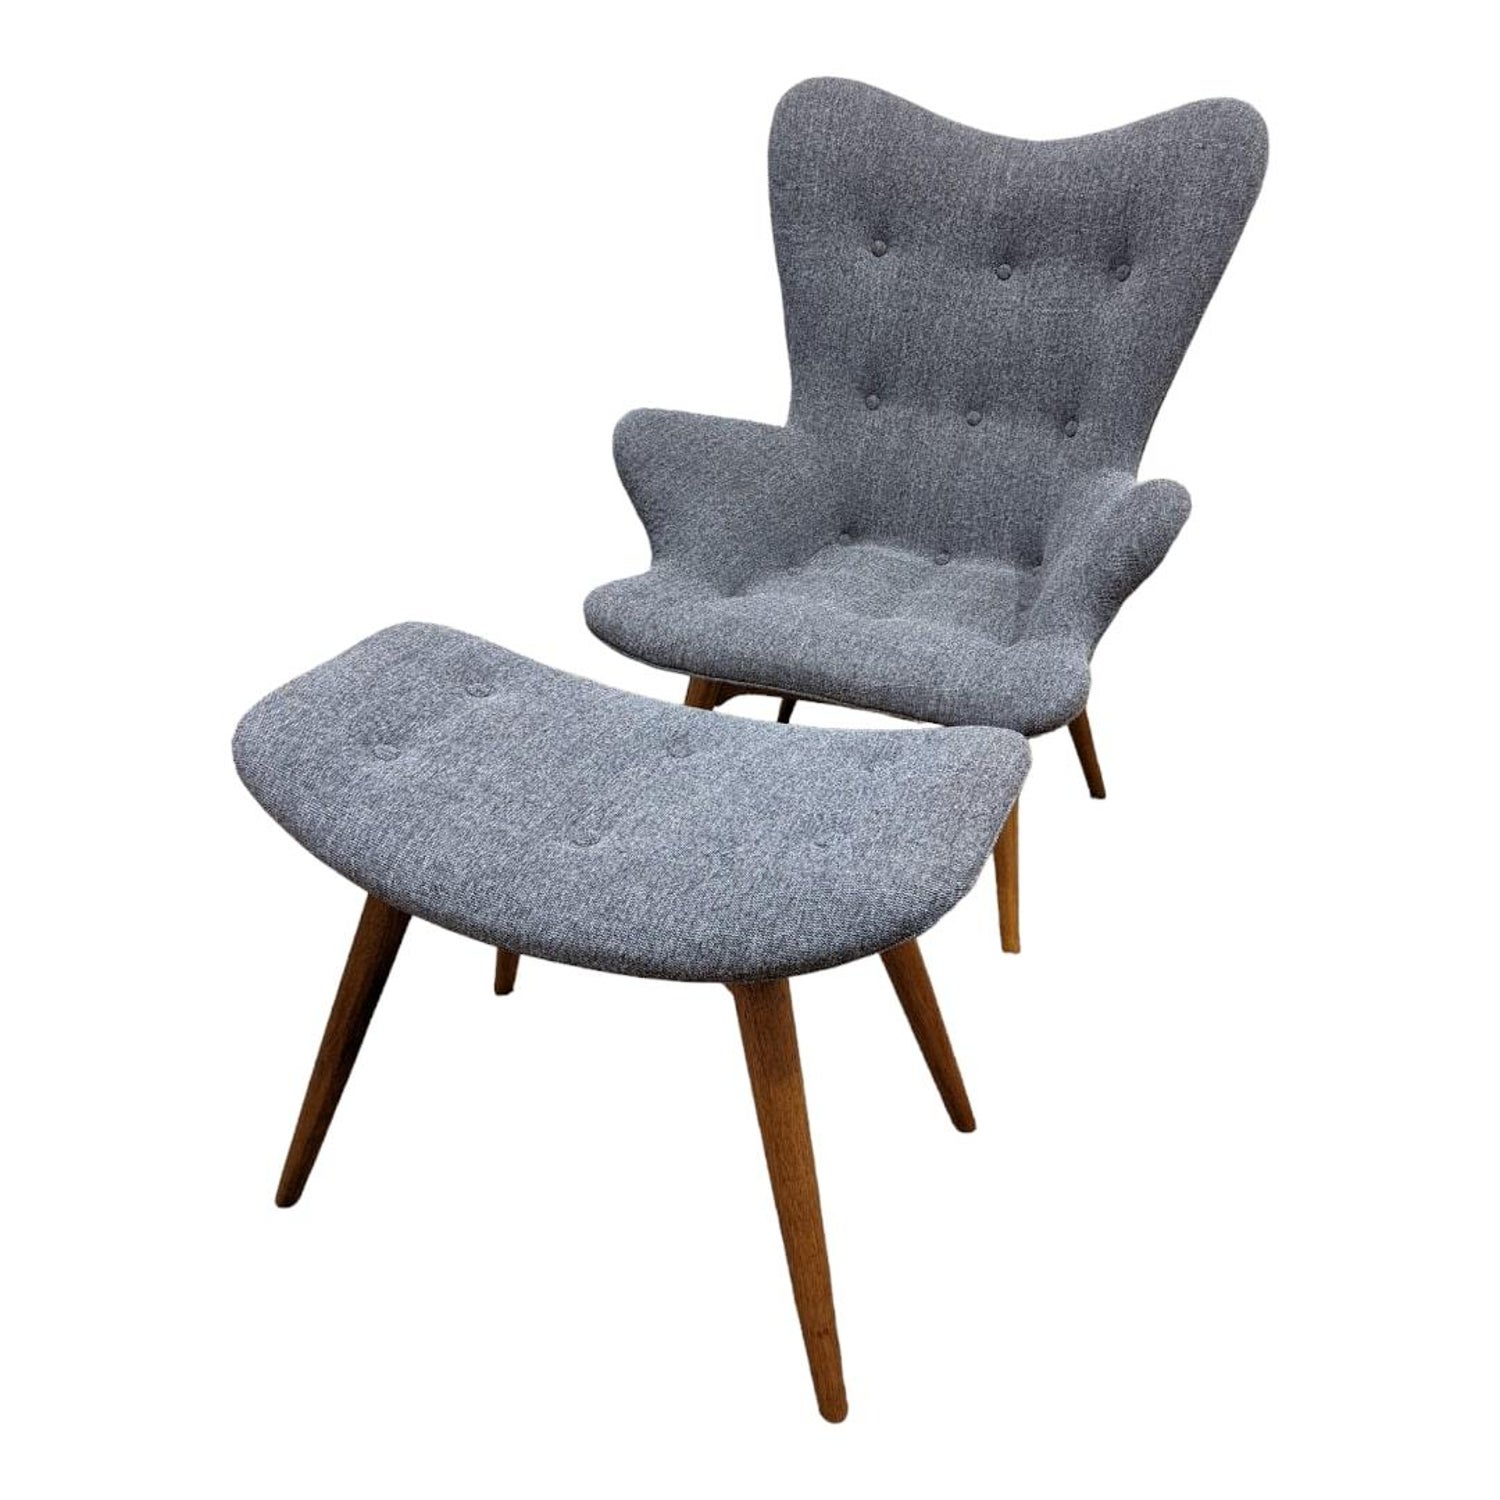 Grant Featherston Seating - 4 For Sale at 1stDibs | grant featherston  numero iv, featherston numero iv for sale, original grant featherston chair  for sale